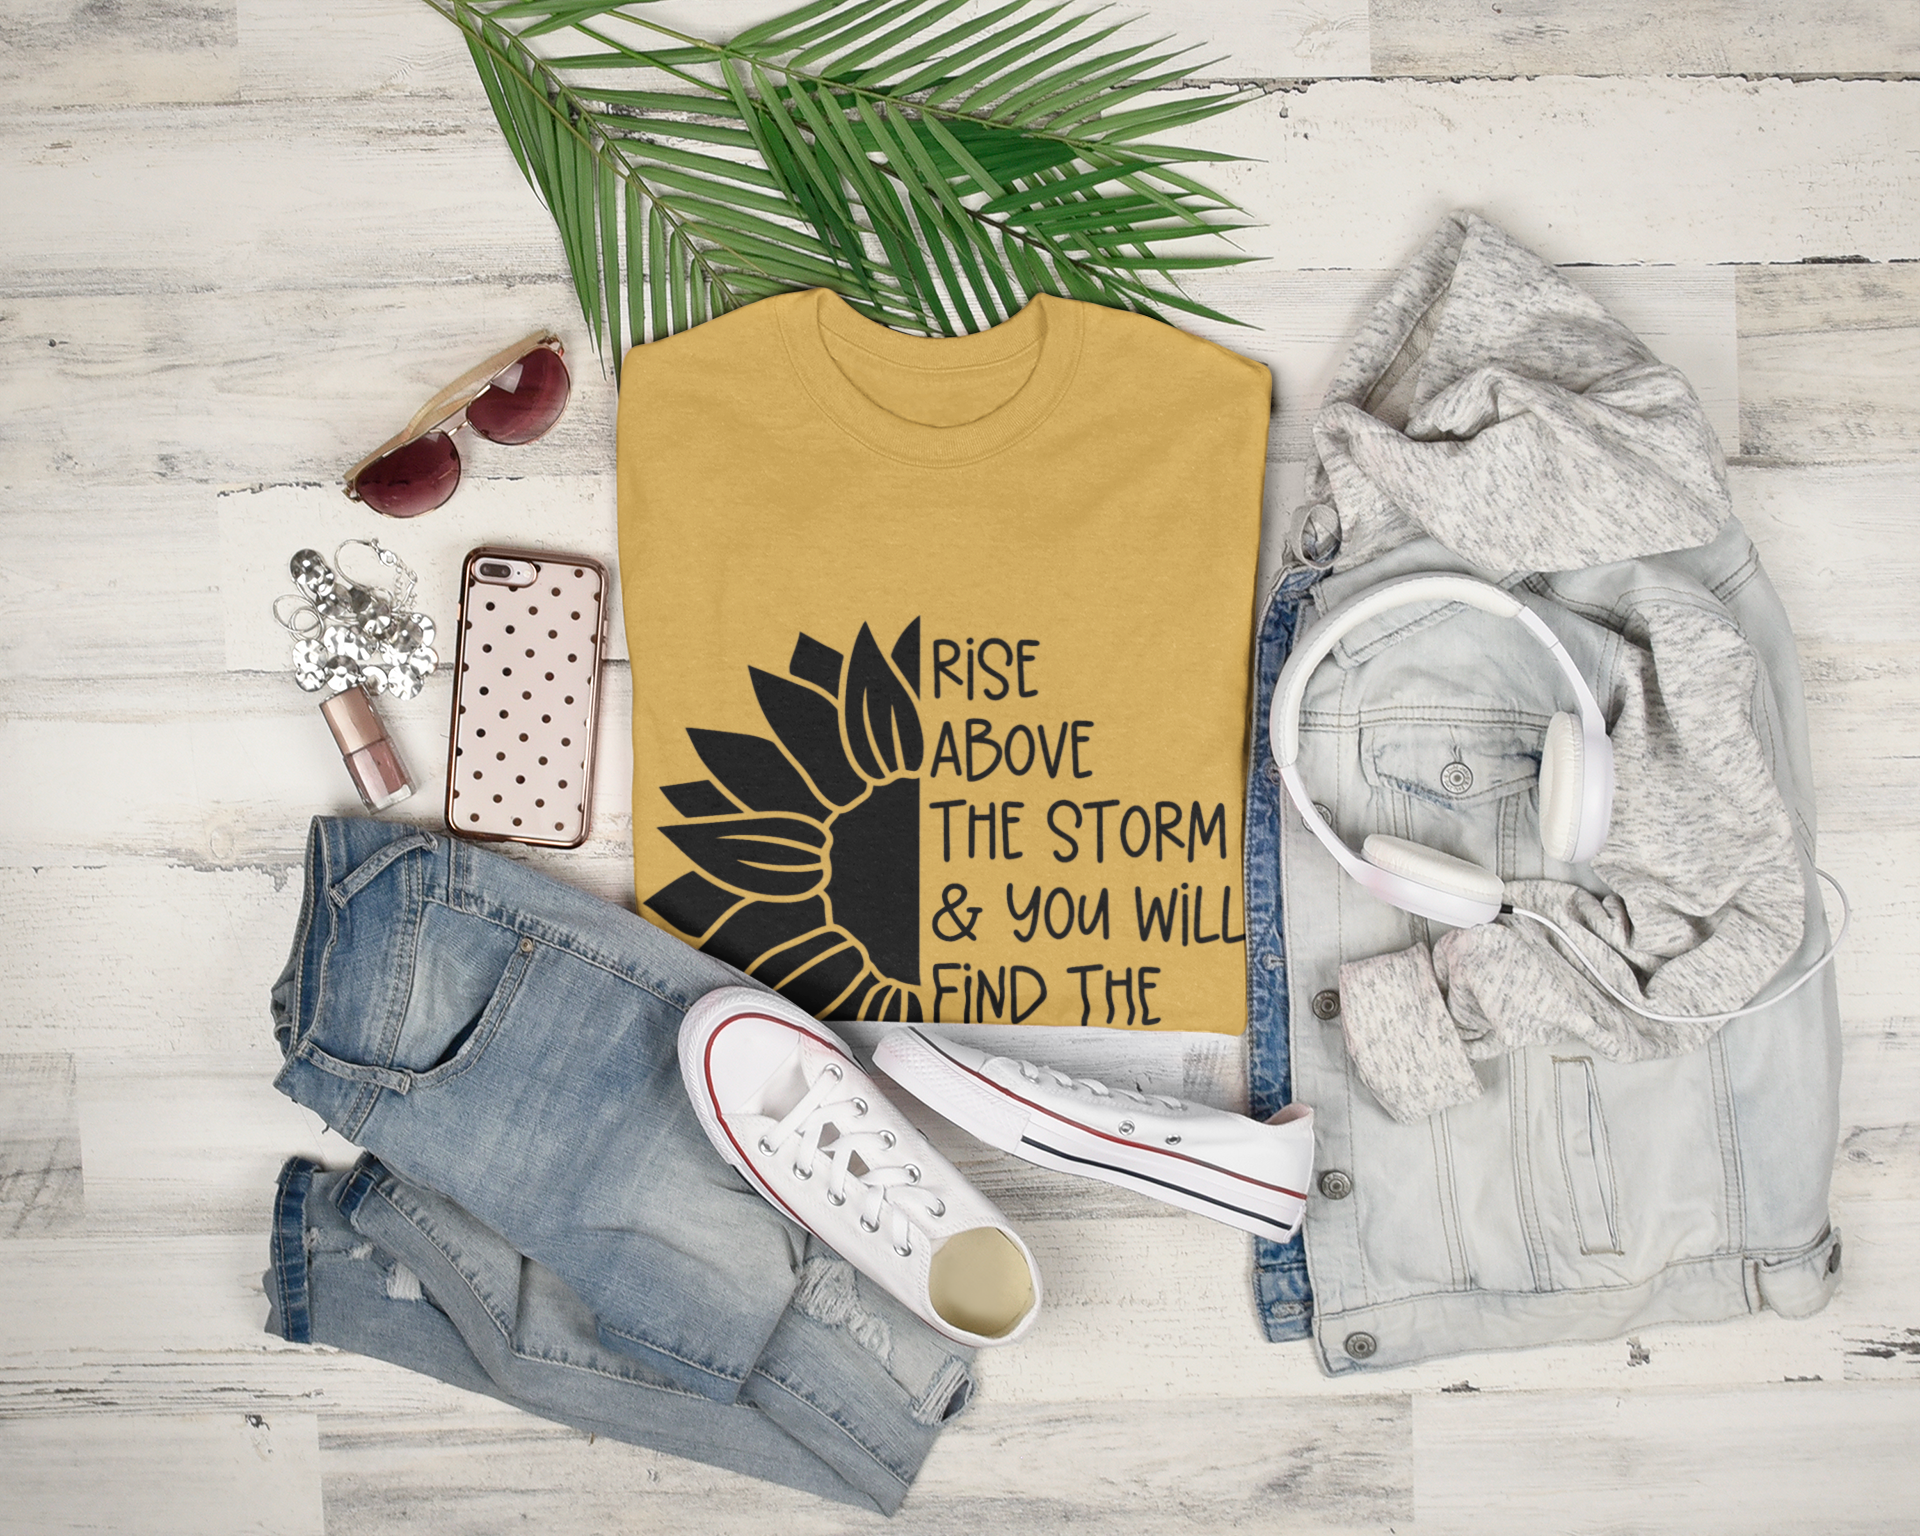 Rise Above The Storm Sunflower T-Shirt. The front has a half of a black sunflower on the left, with the right half having a quote of "rise above the storm and you will find the sunshine". This is a black design on a yellow shirt. This is the front view of the shirt folded on a wooden background stylized with other like items next to it.